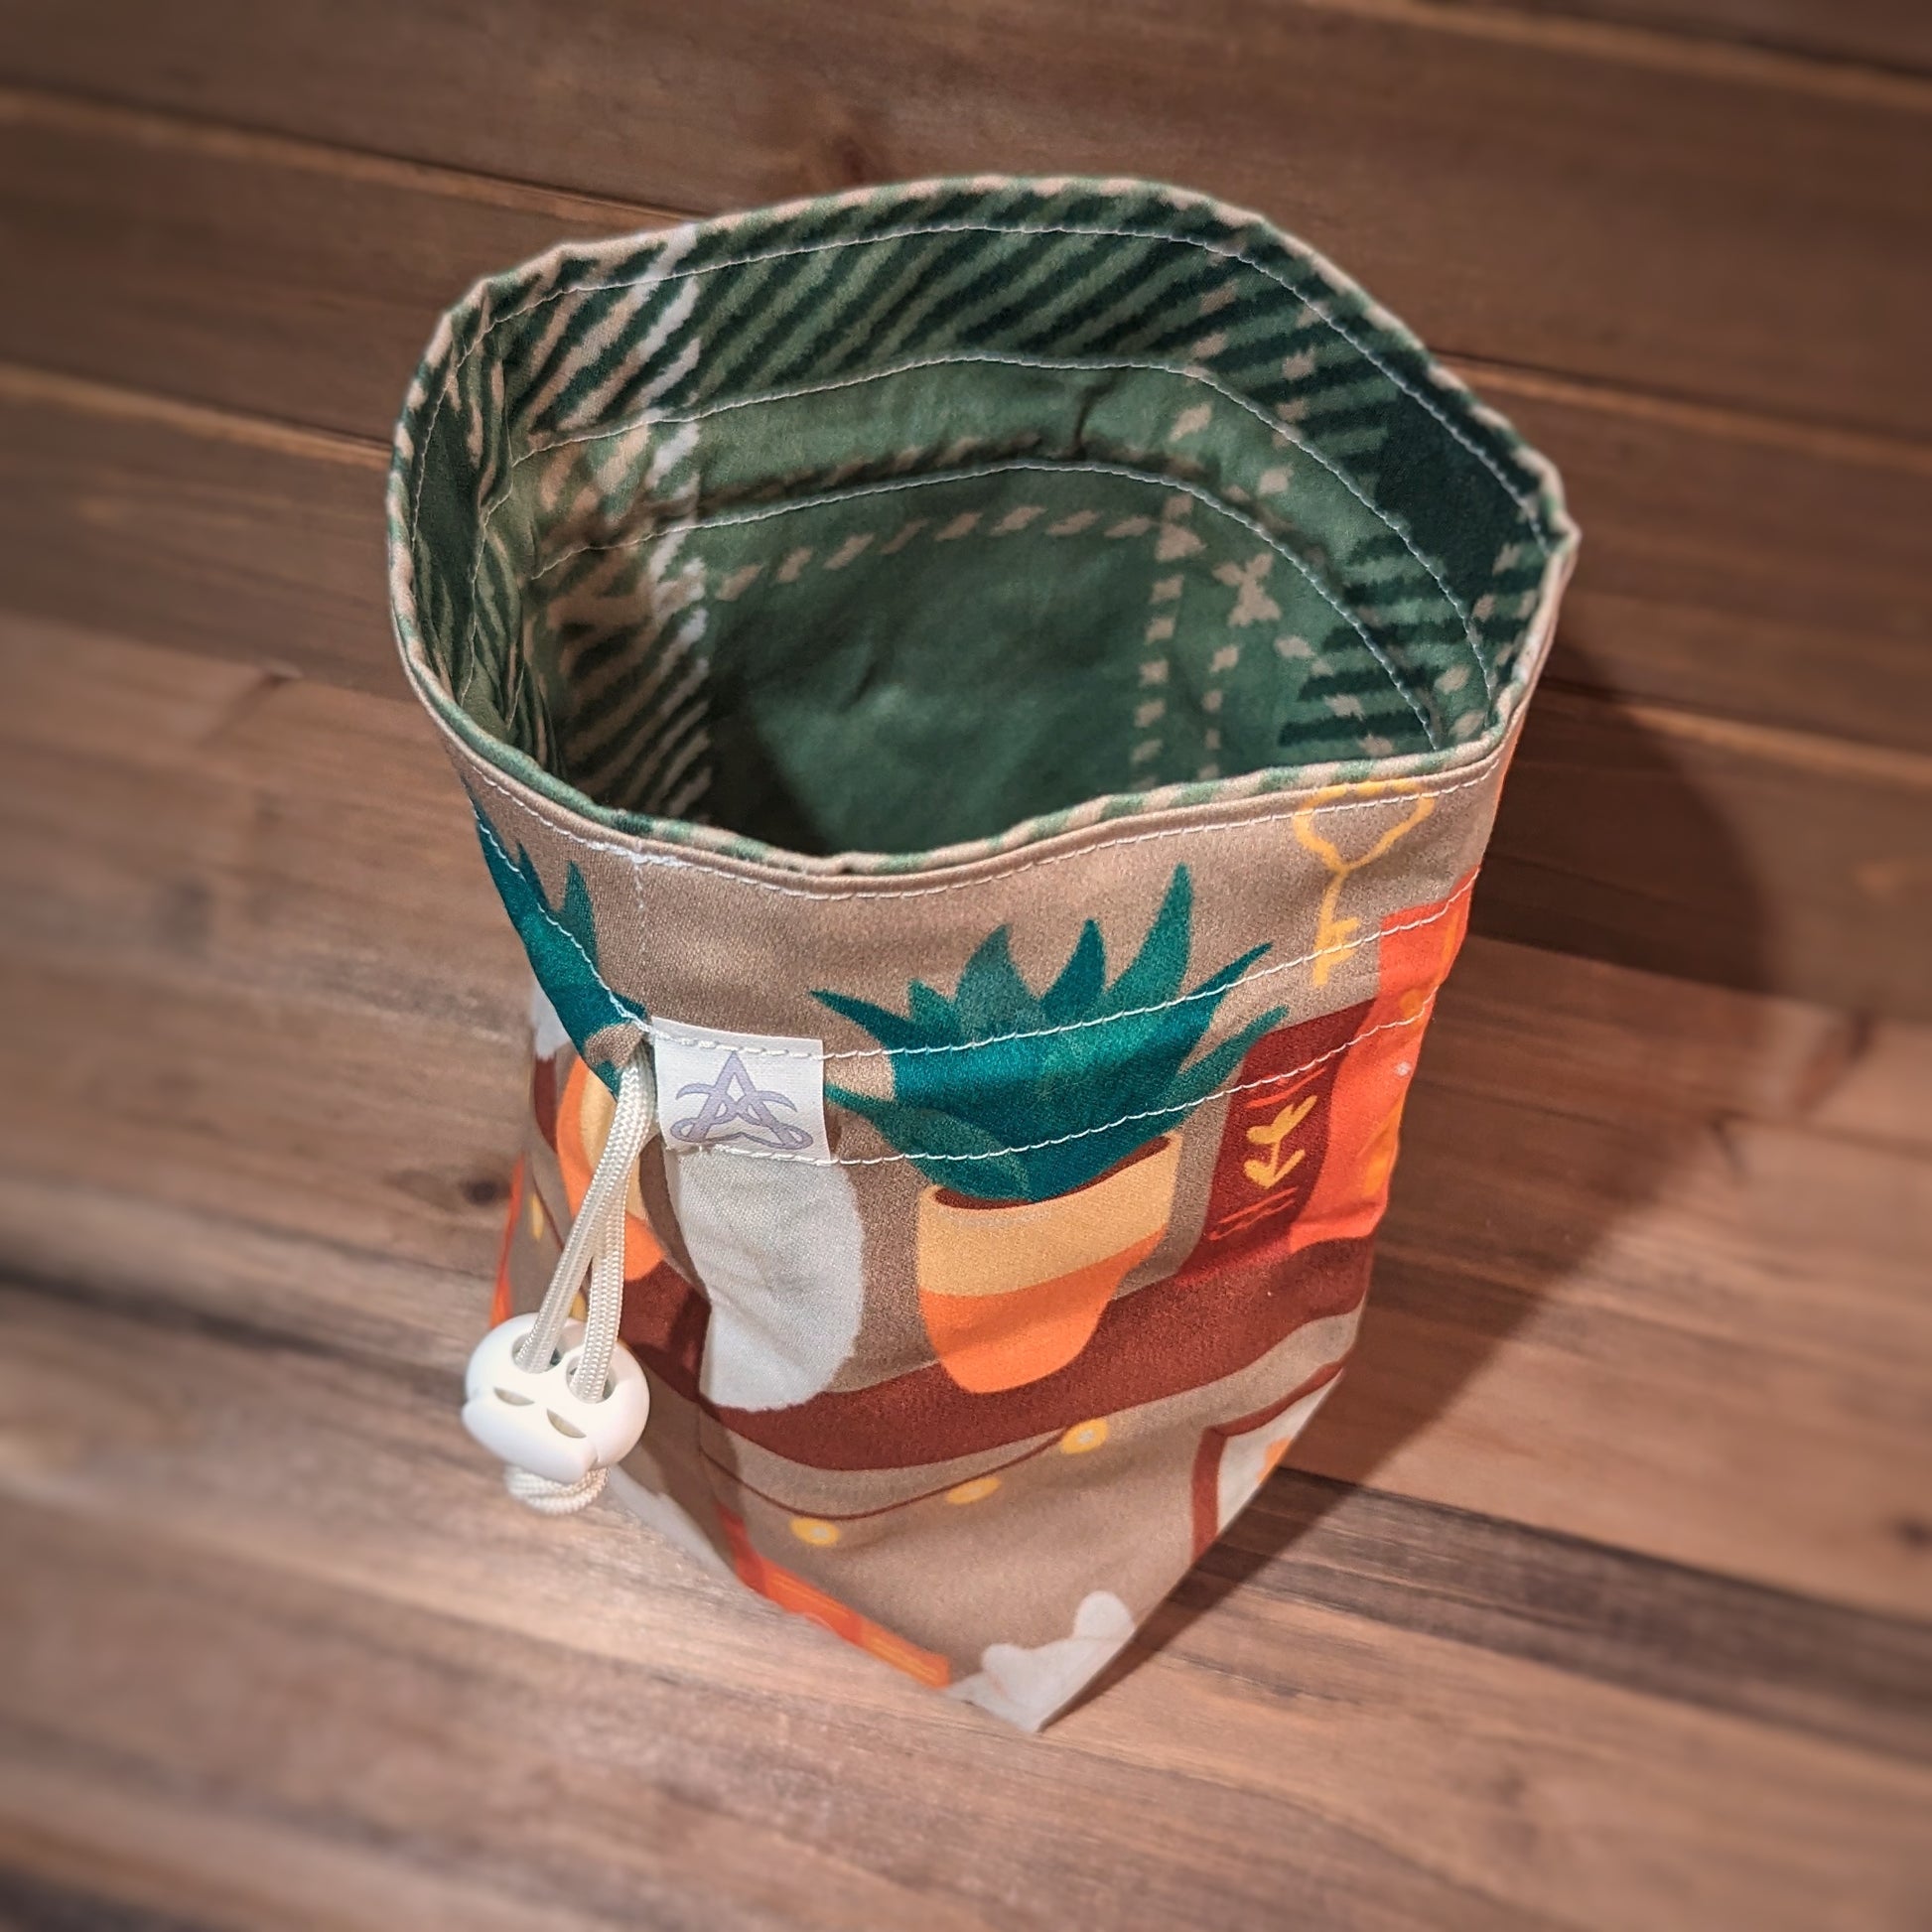 An orange, brown, yellow, and green bookshelf with white cats and potted plants is printed outside a drawstring bag with white stitching and drawstring and a green and cream plaid liner.